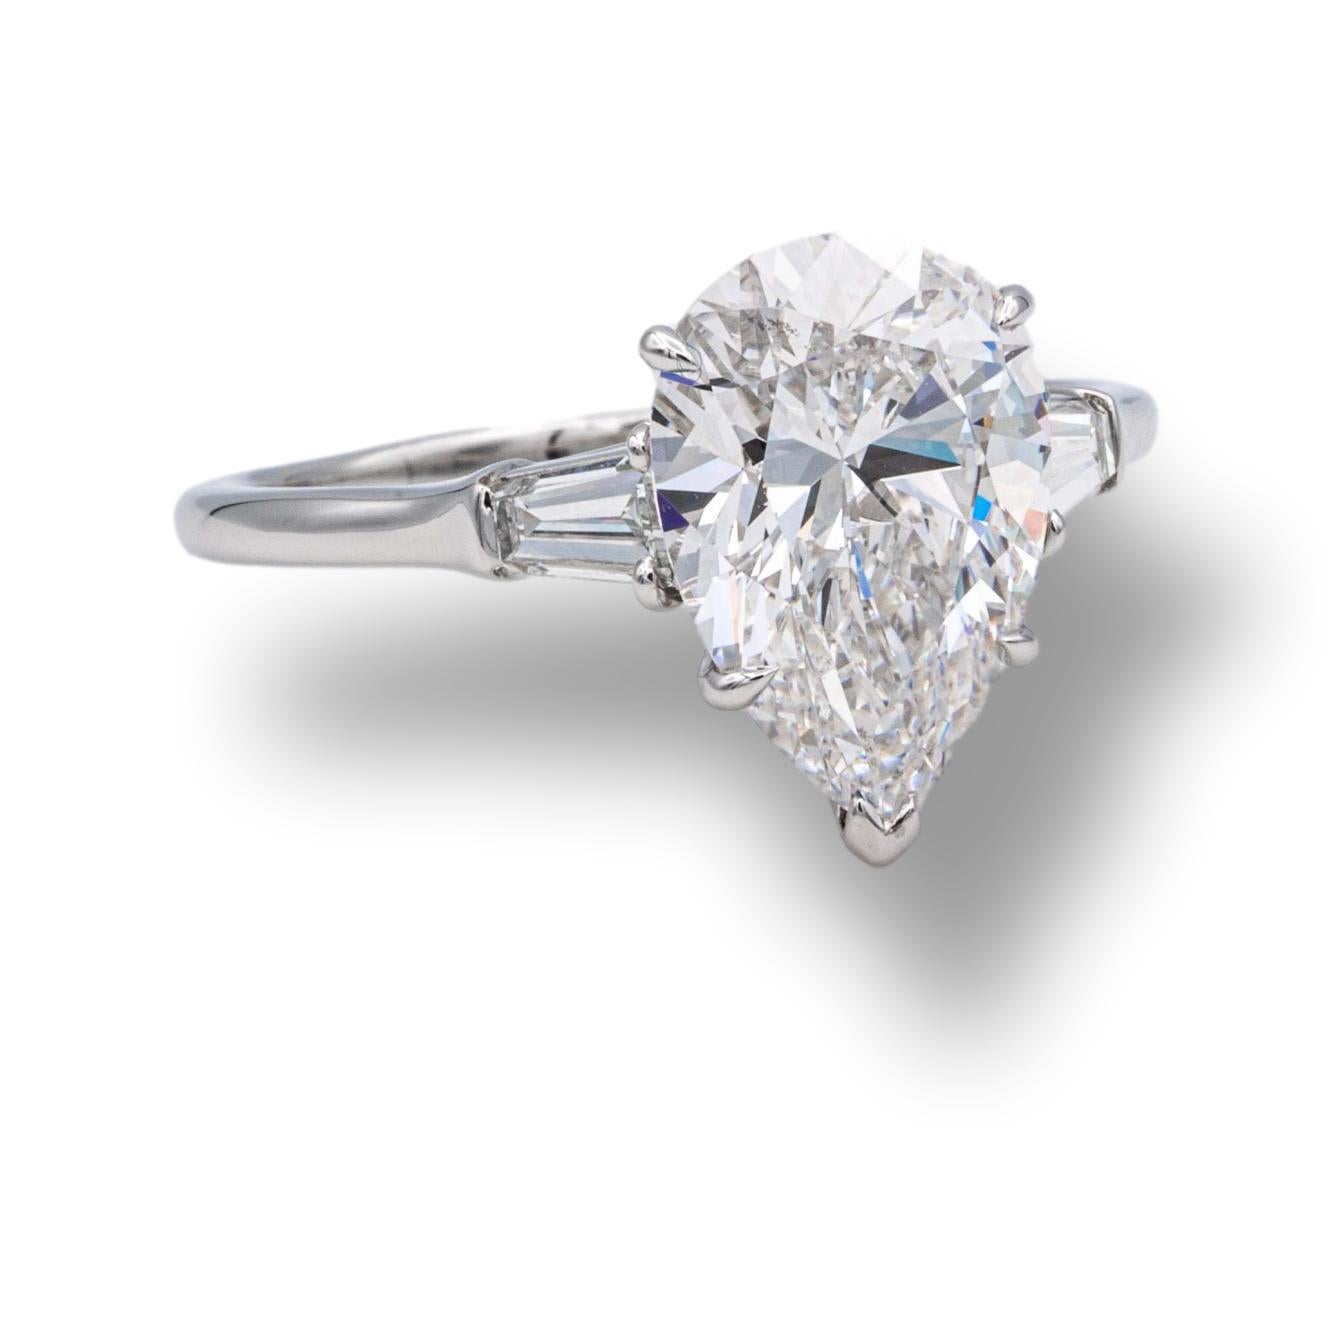 Harry Winston Platinum Pear Shape Diamond Engagement ring finely crafted in platinum with a fine GIA Certified pear shape center diamond weighing 3.27 cts. H color SI1 clarity flanked by two tapered baguette diamonds weighing .43 carats total